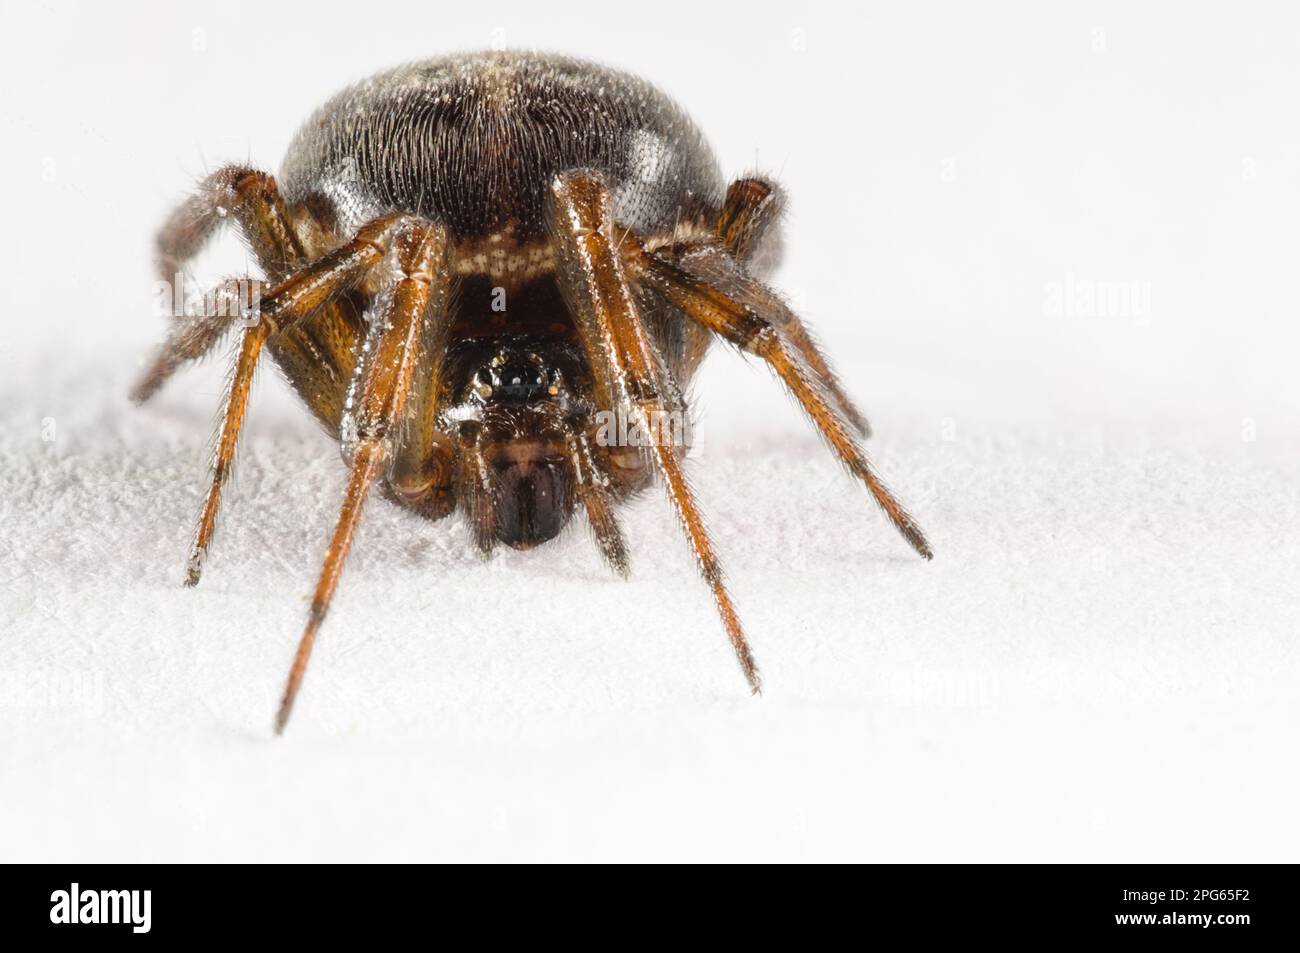 Fat spider (Steatoda bipunctata), Fat spiders, Other animals, Spiders, Arachnids, Animals, Hooded spiders, Common False Widow Spider adult female Stock Photo